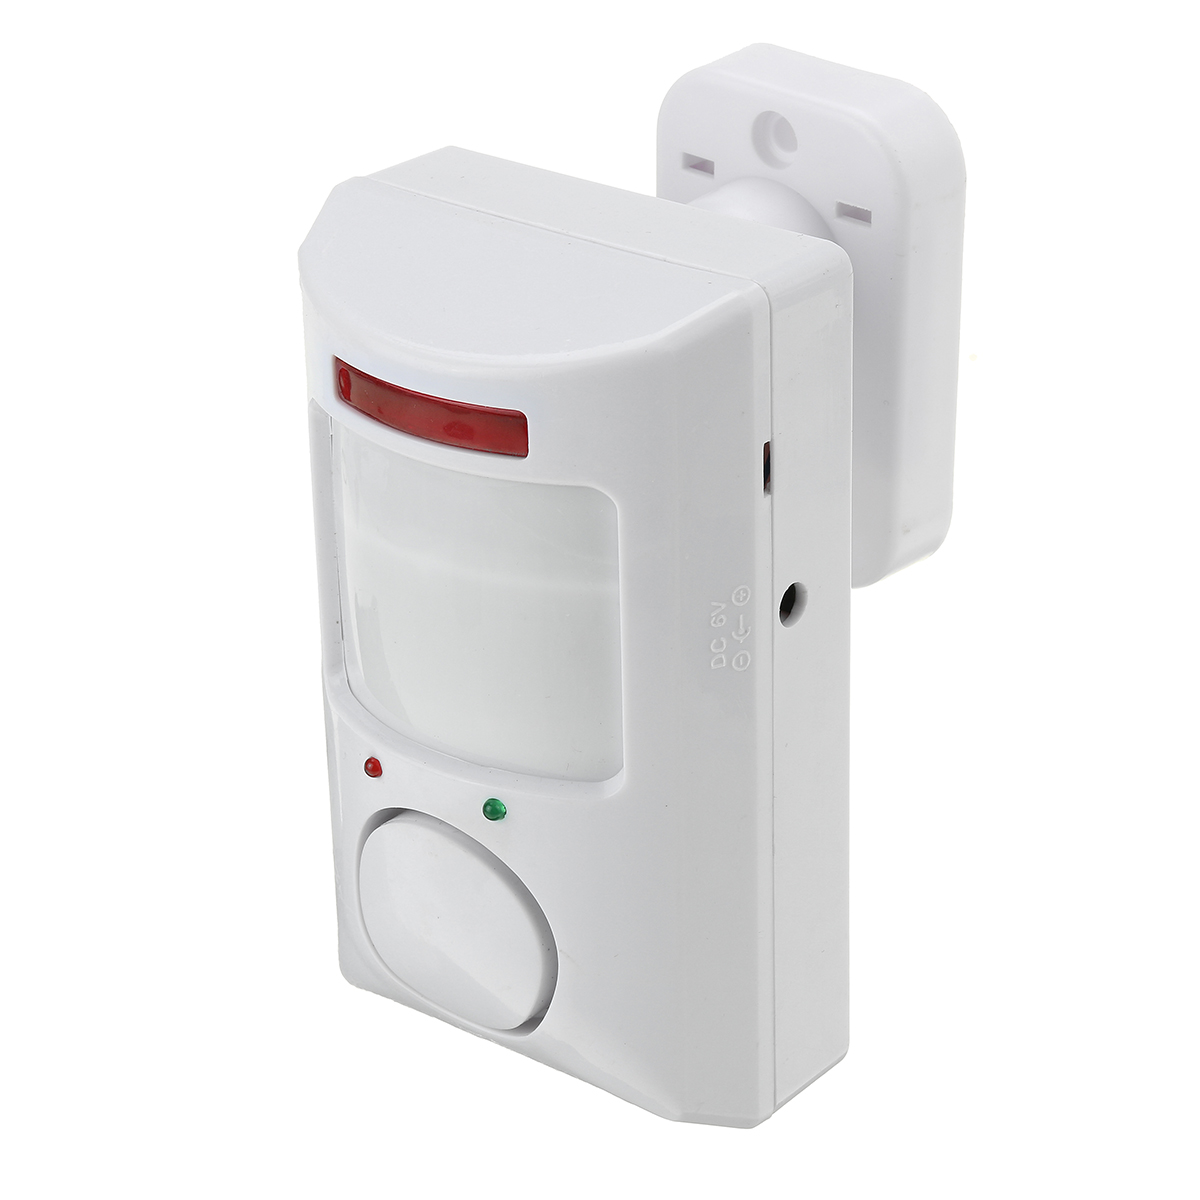 2 in 1 Motion Wireless Security Alarm and Chime & Remote Control+Holder - Auto GoShop